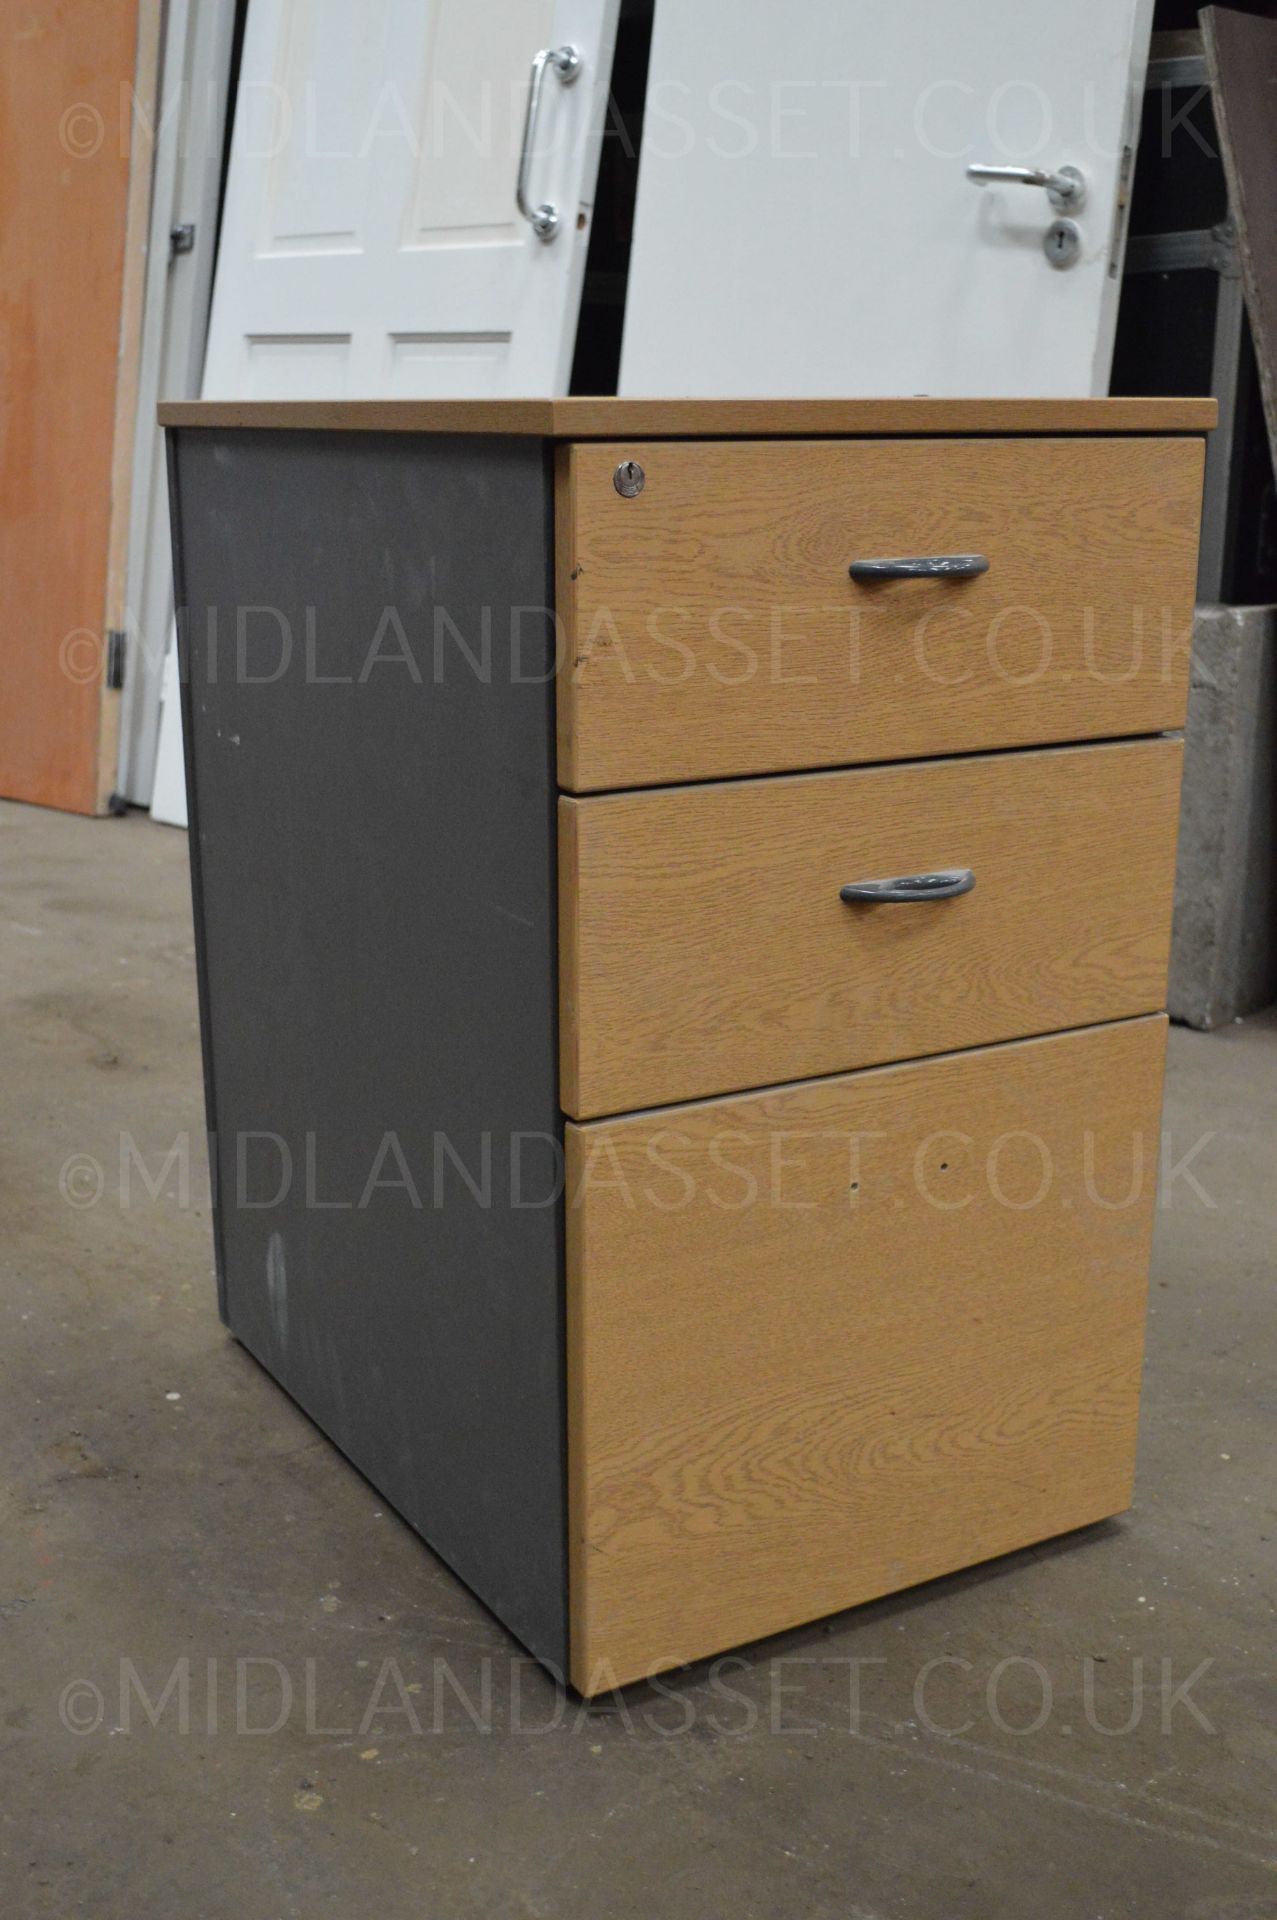 RECTANGULAR CANTILEVER DESK AND A FREE DRAW!!! - USED CONDITION (PEN MARKS ETC) OAK OFFICE DRAWERS - Image 4 of 6